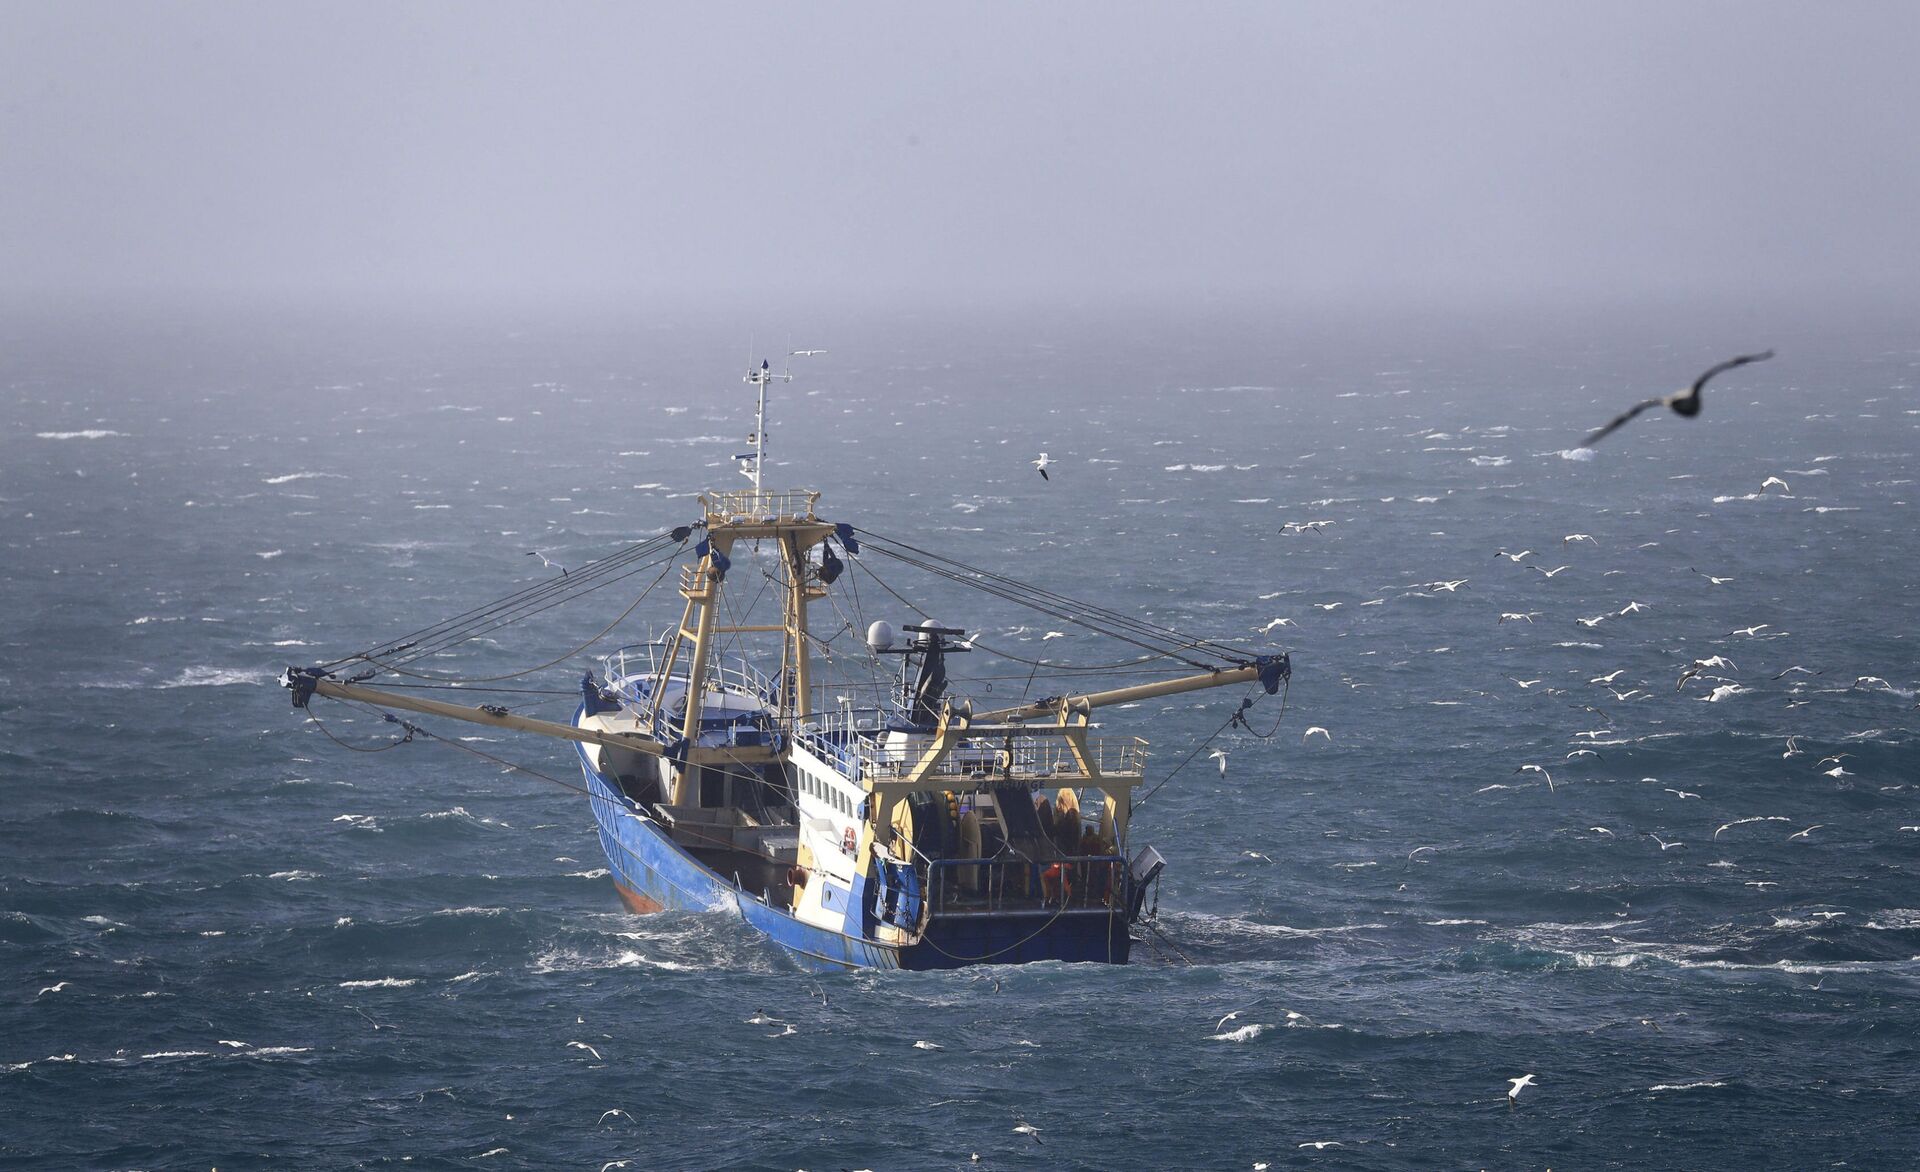 A fishing boat at work in the English Channel, off the southern coast of England, Saturday Feb. 1, 2020. The fishing industry is predicted to be one of the main subjects for negotiations between the UK and Europe, after the UK left the European Union on Friday. - Sputnik International, 1920, 29.10.2021